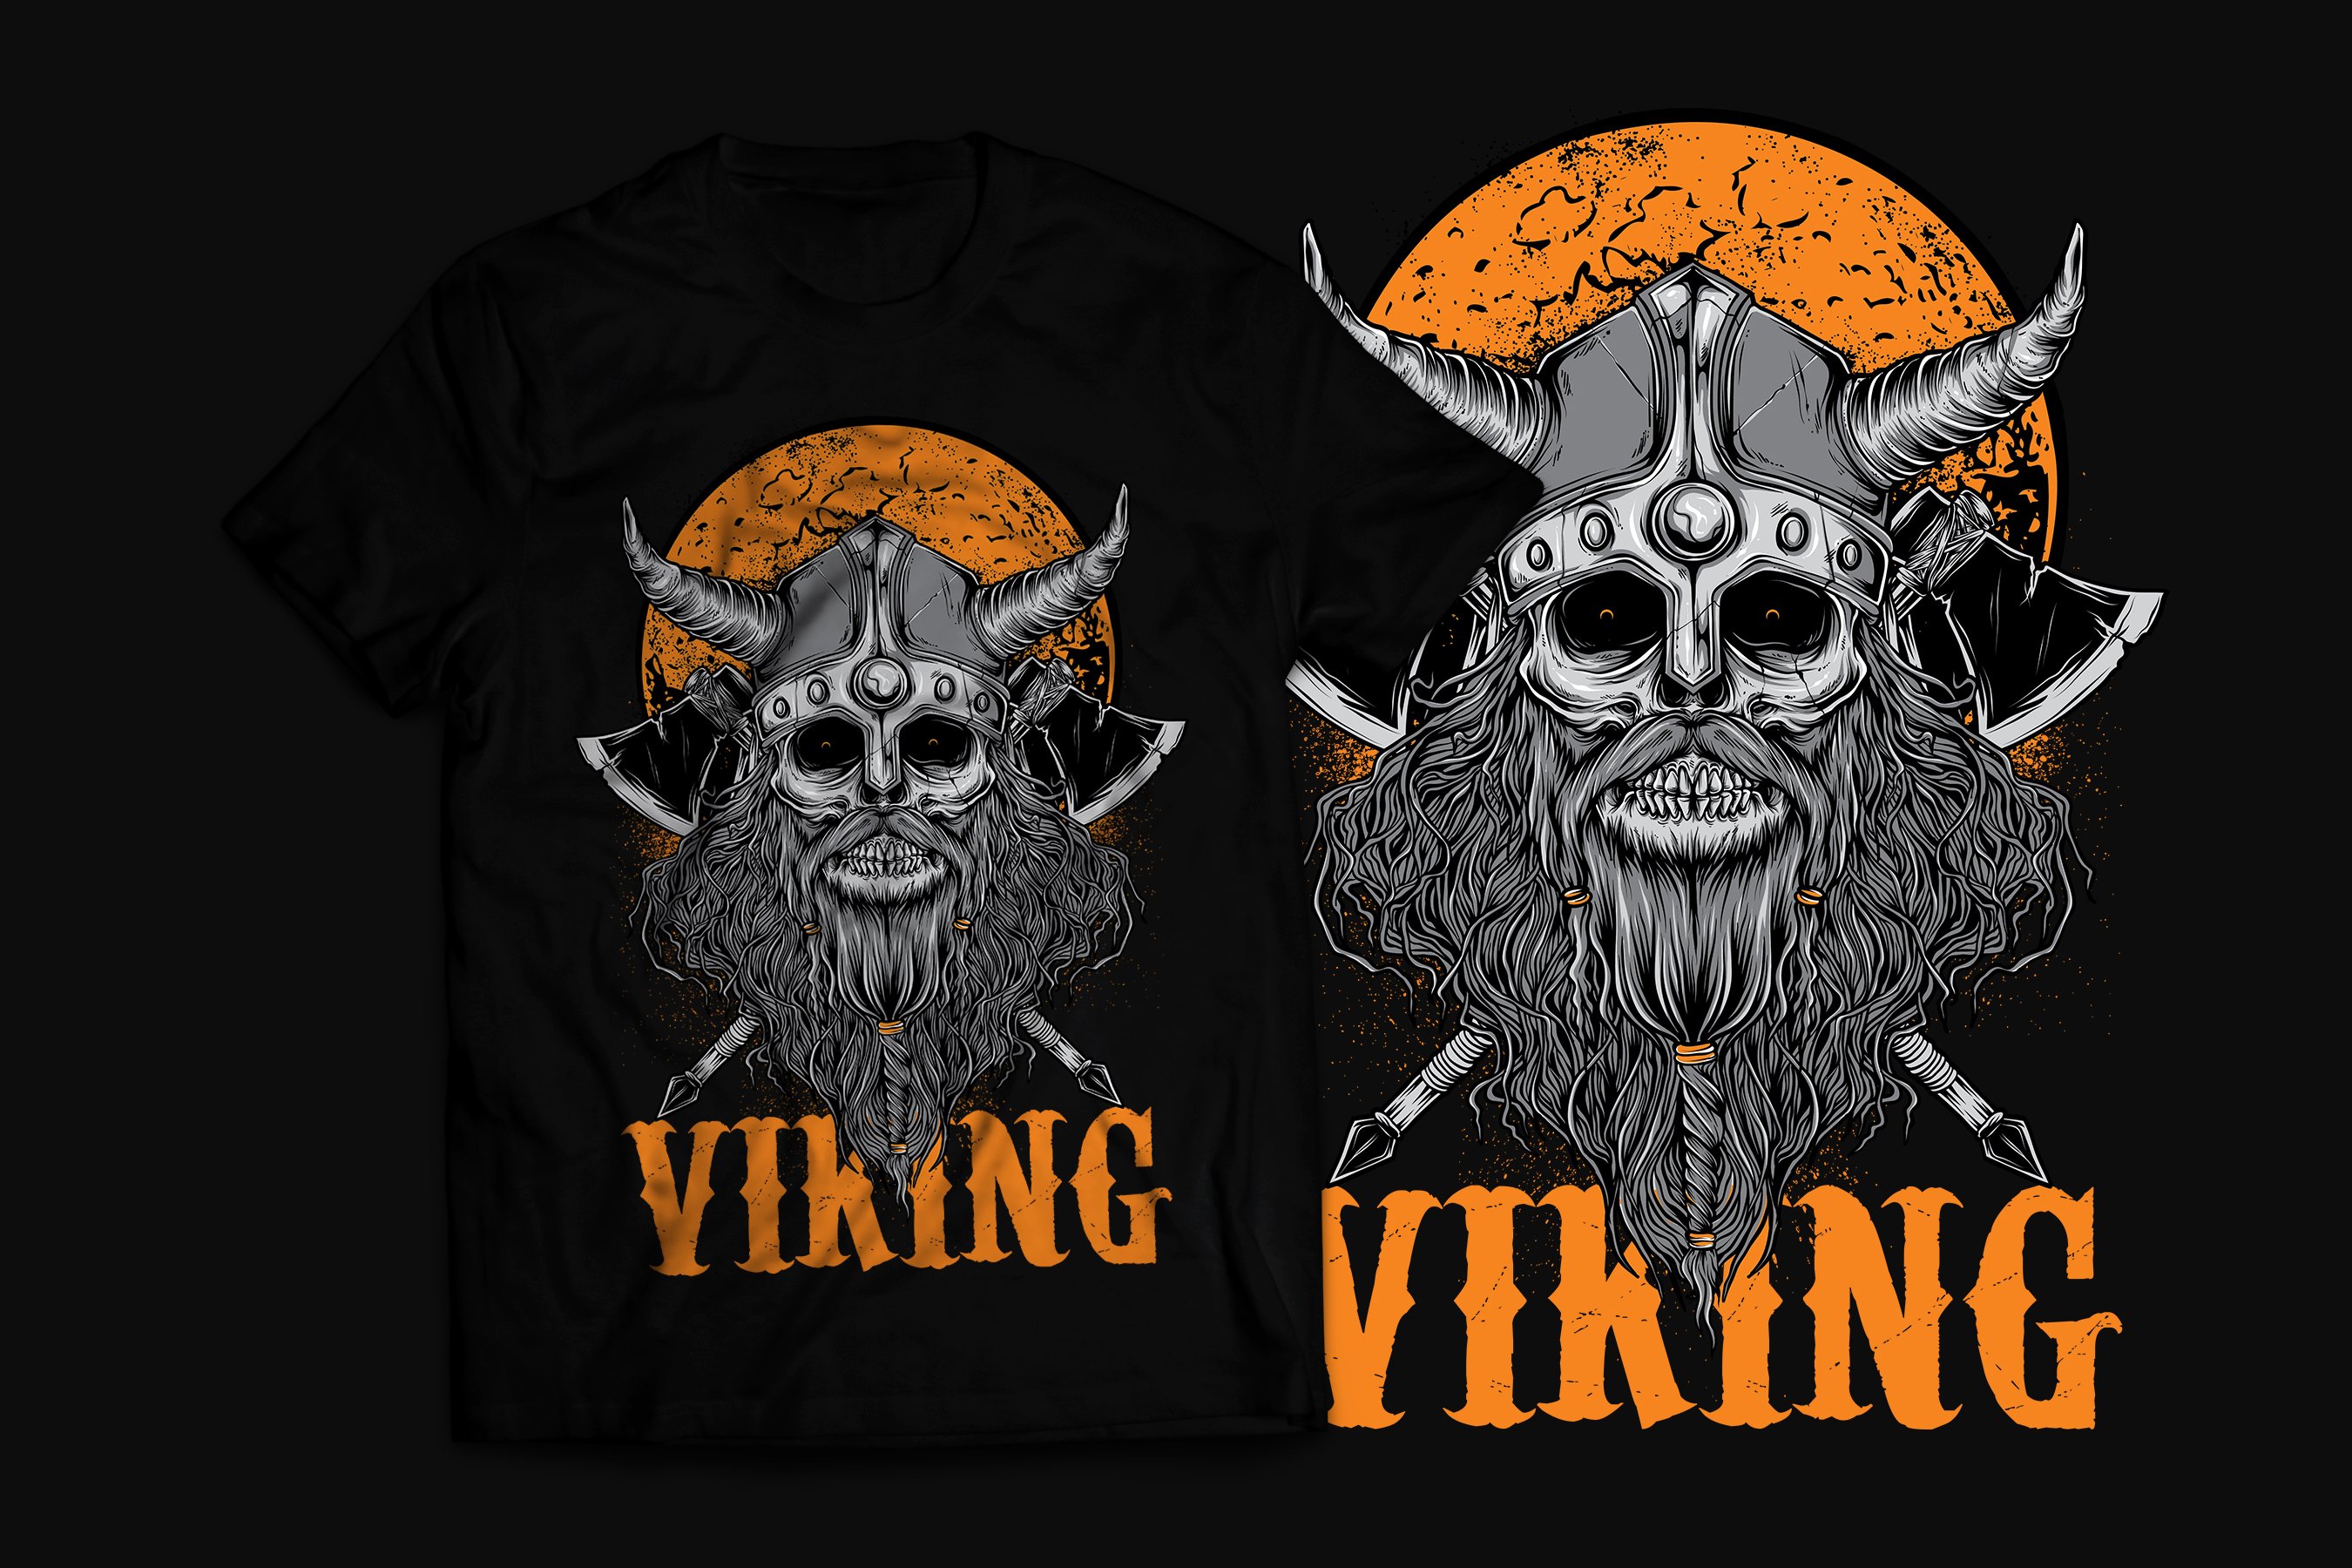 Black background with the scary viking graphic.